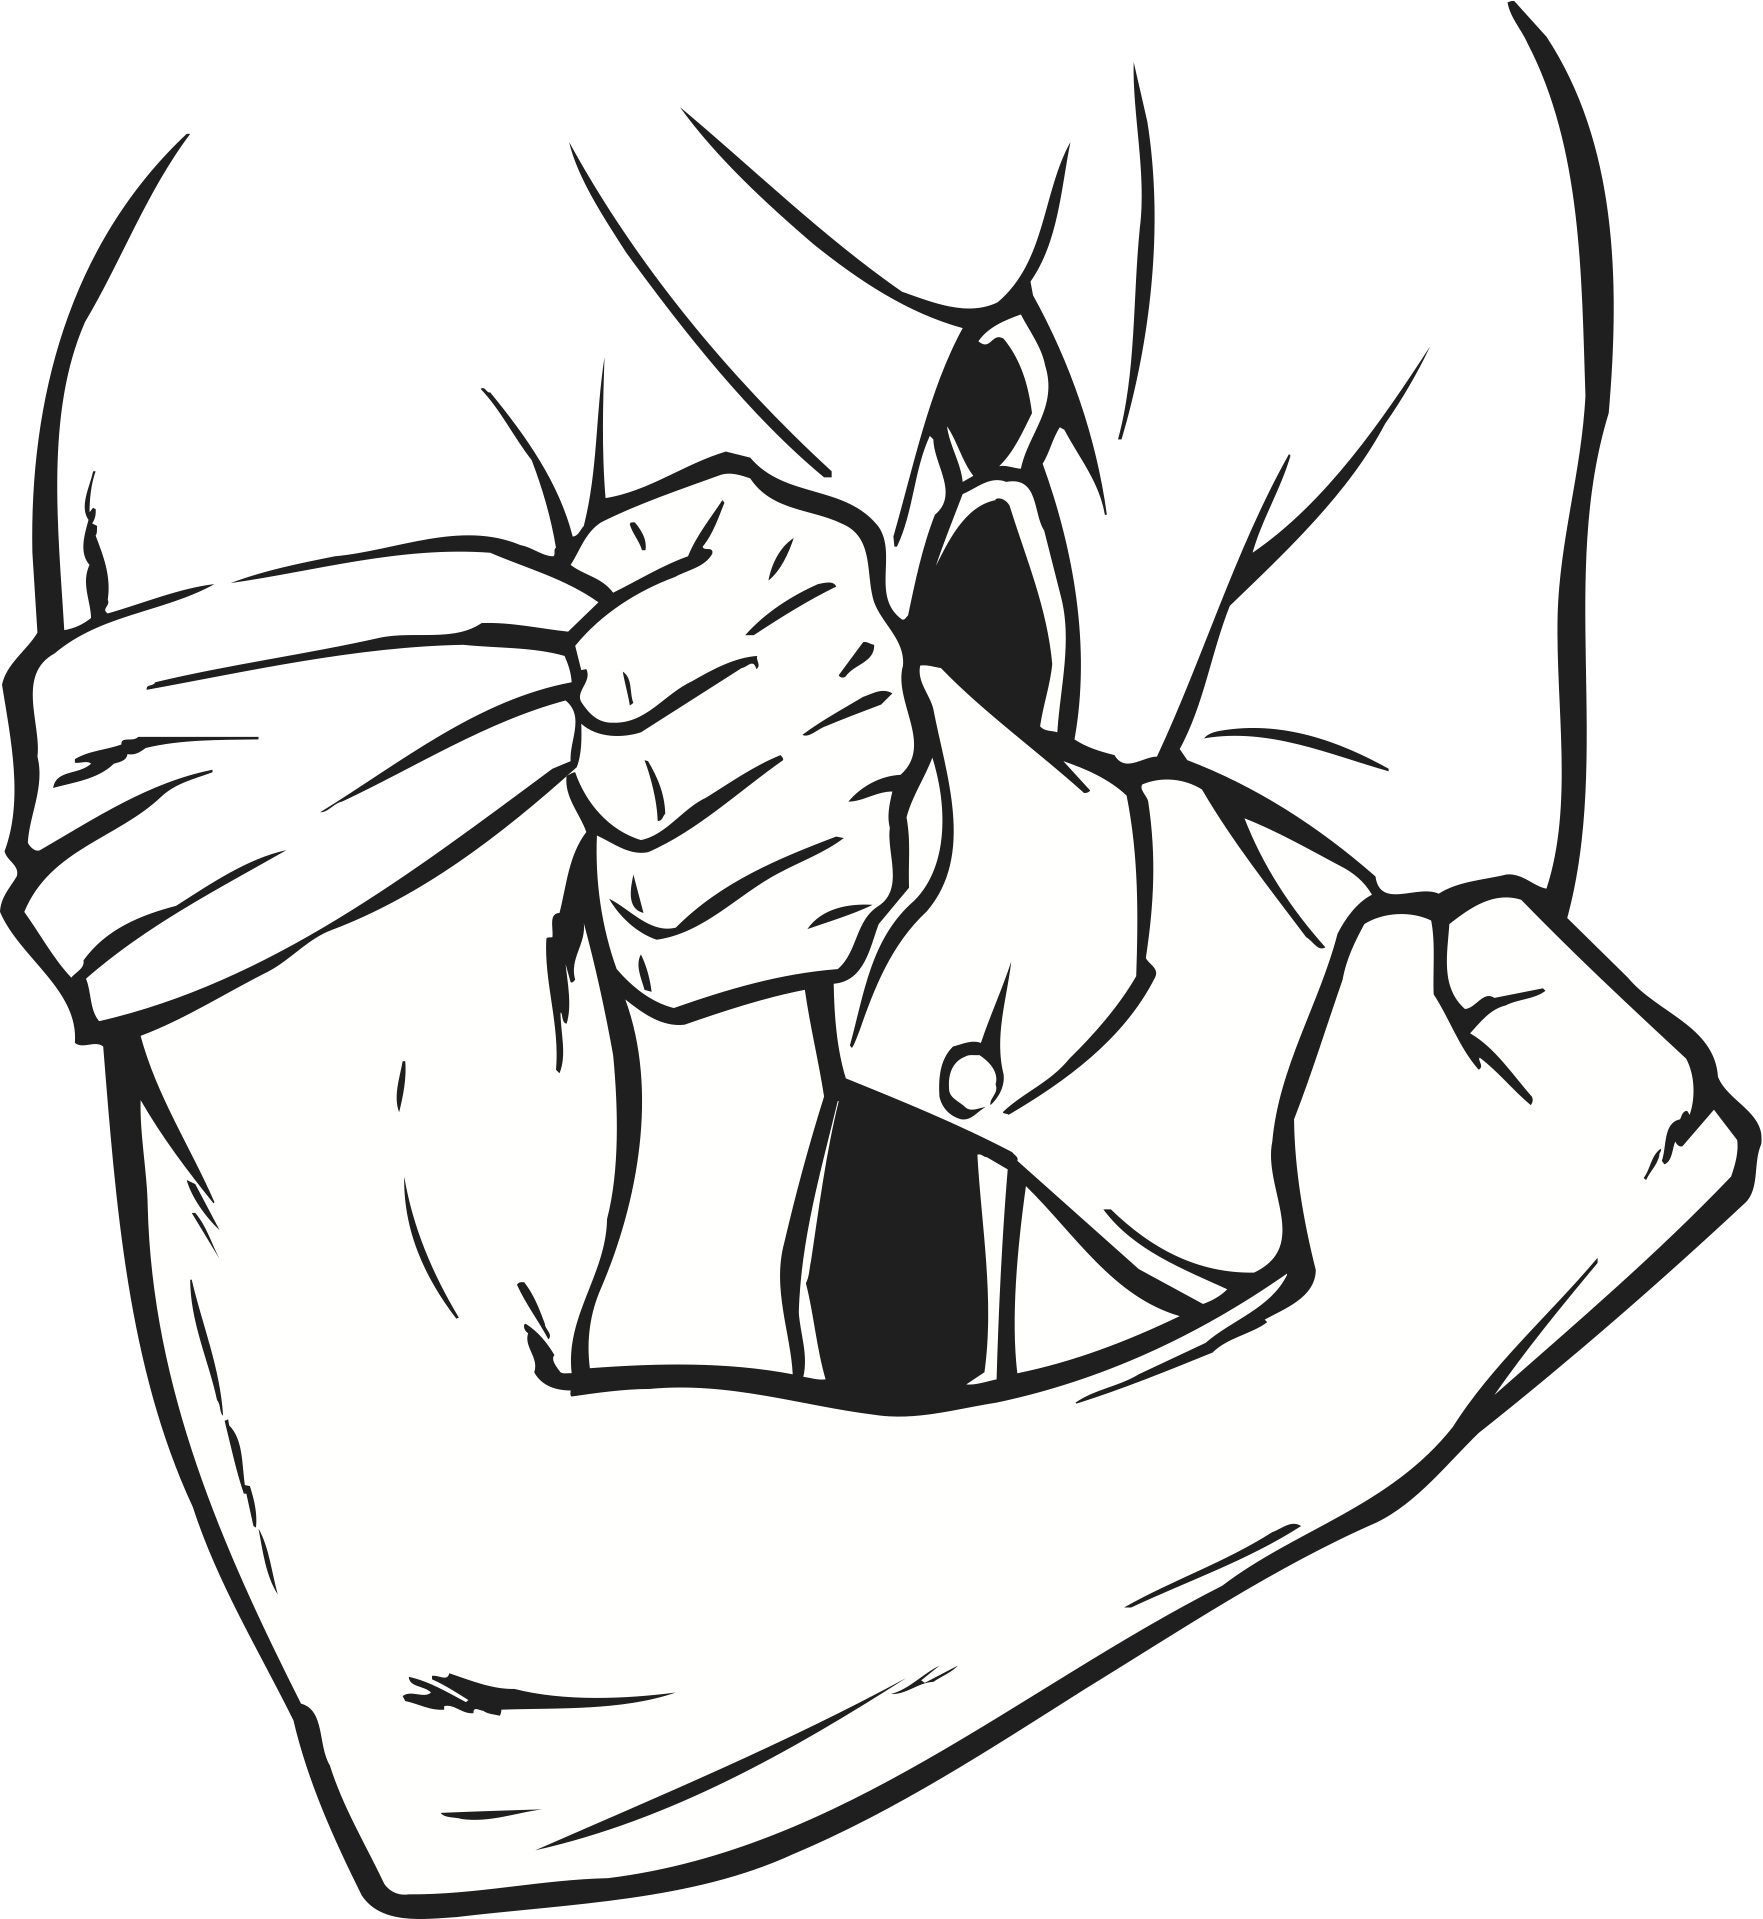 Arm Muscle Black And White Clipart